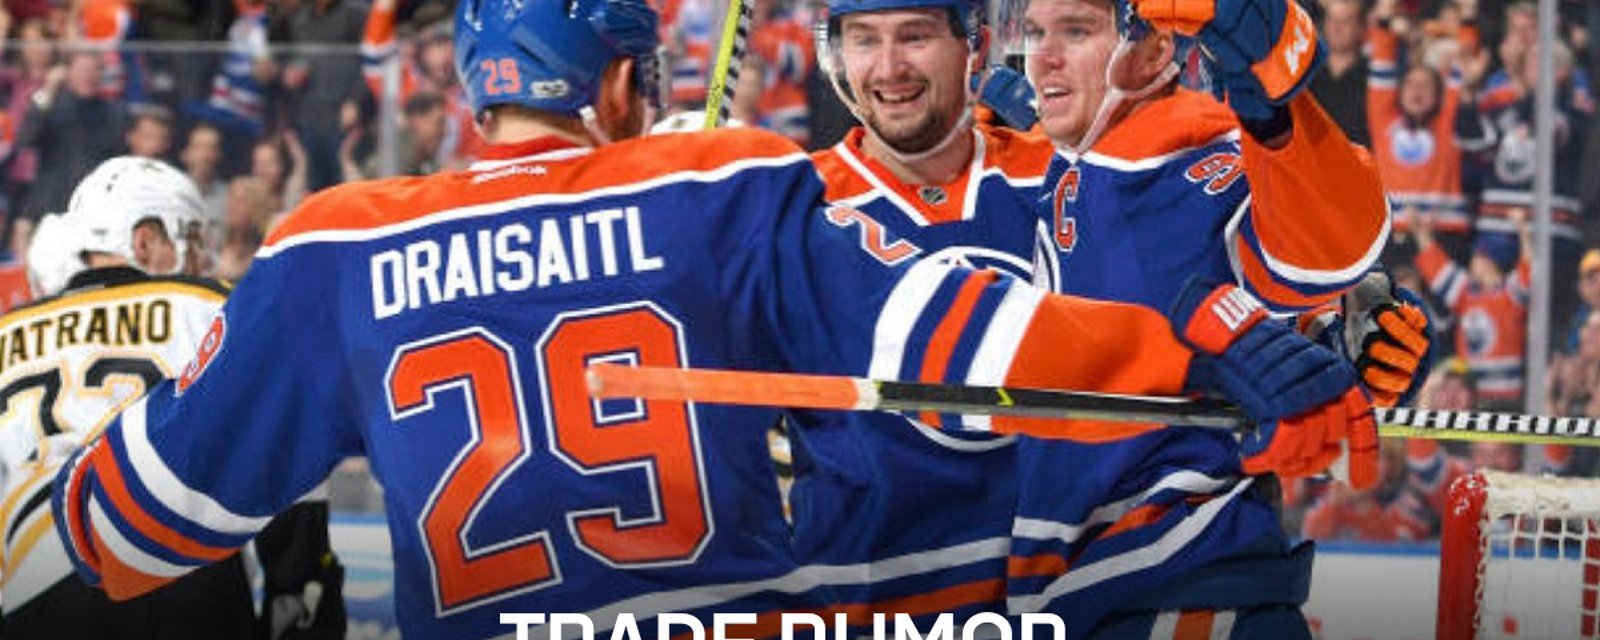 Breaking: Source confirms the Oilers are willing to trade one of their forwards.